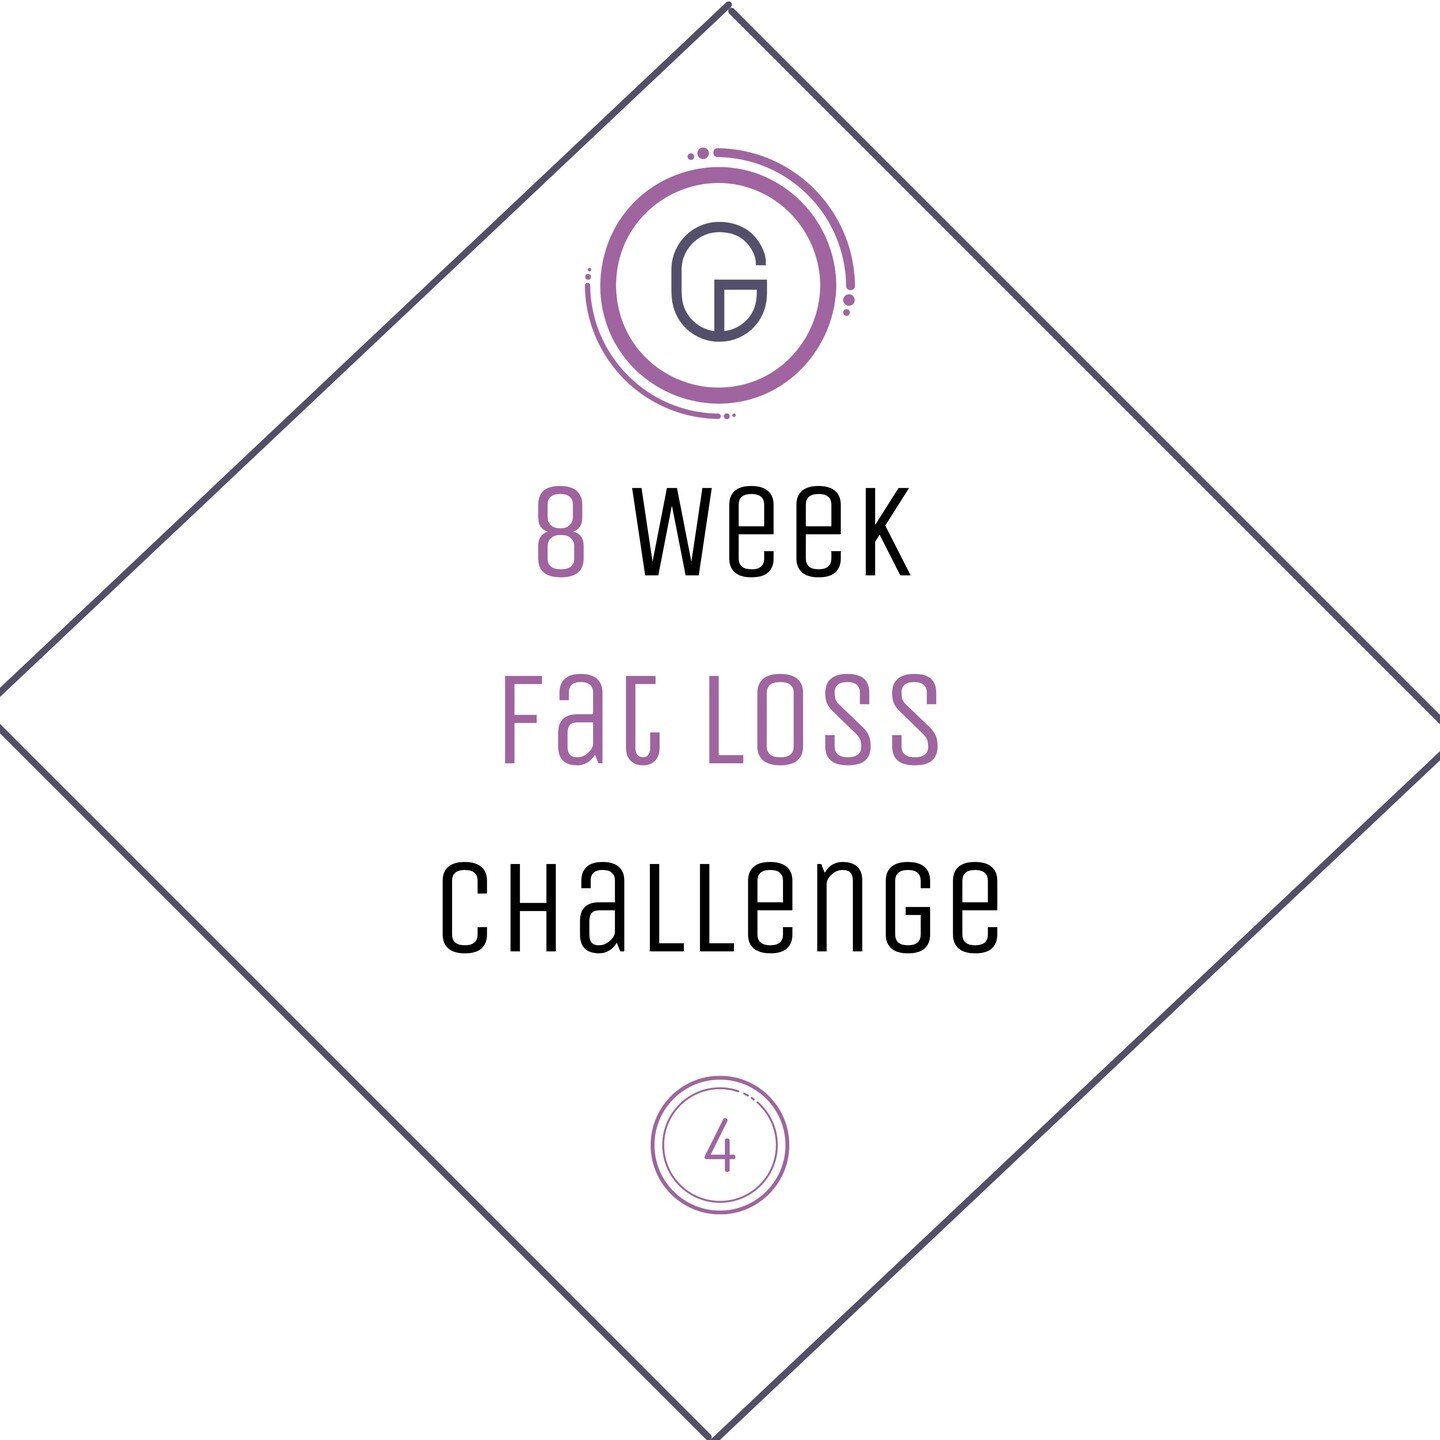 8-WEEK CHALLENGE

Annie has completed the 8-week challenge!

Her goal was to lose fat and gain muscle and check out the photos of her achievement.

She doesn't plan to stop now. She still trains 3+ times a week.

She will soon set up another goal for